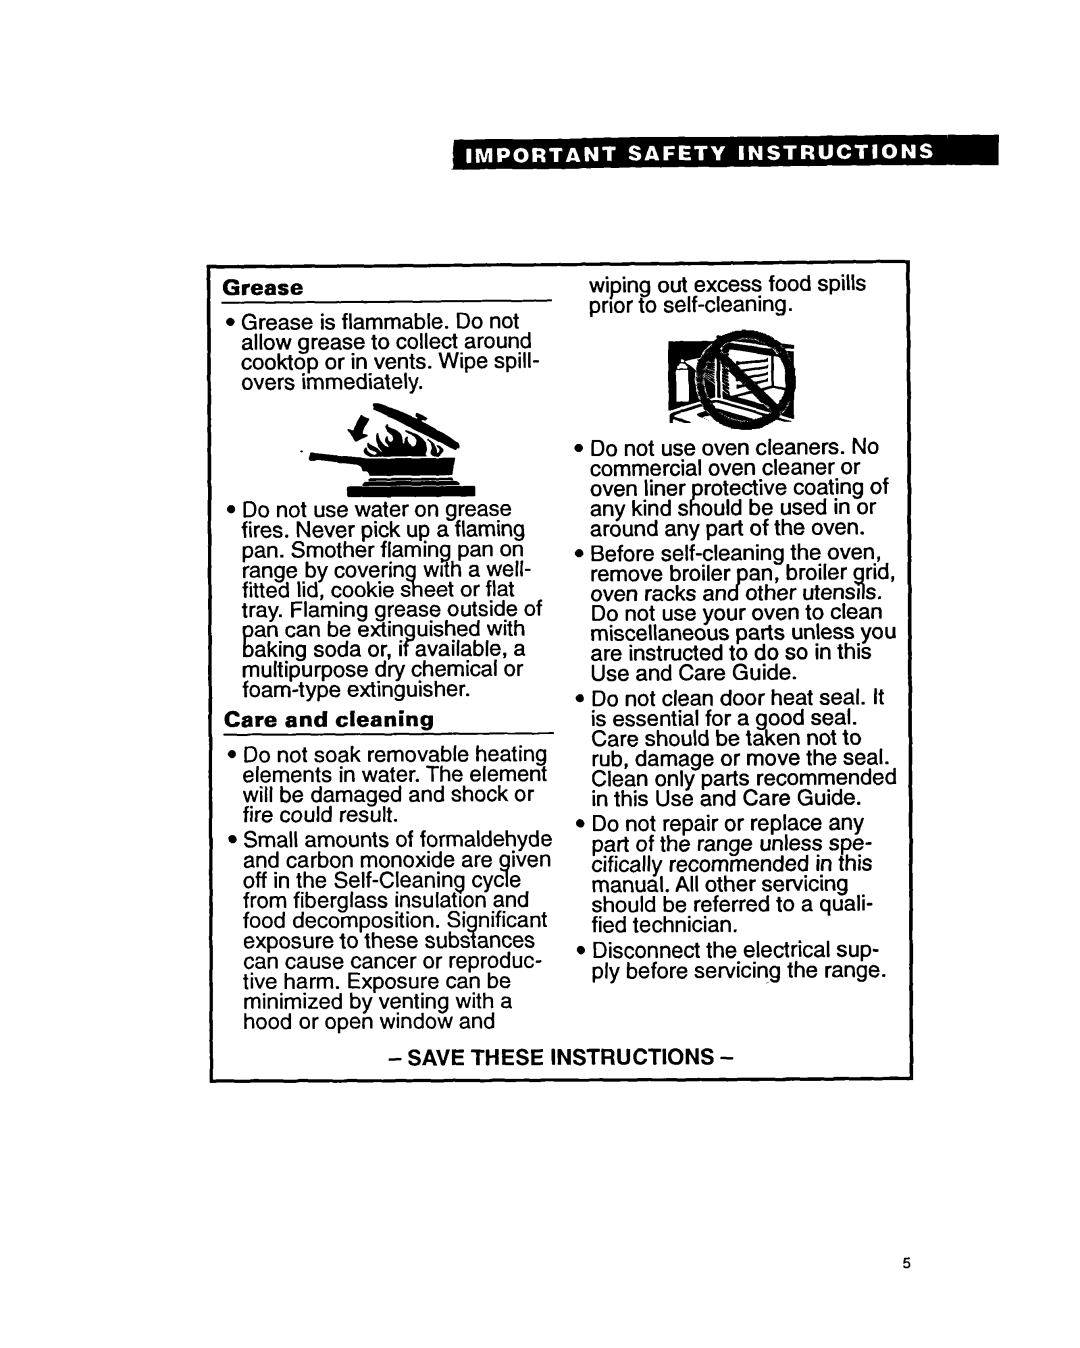 Whirlpool FES340Y important safety instructions Grease 